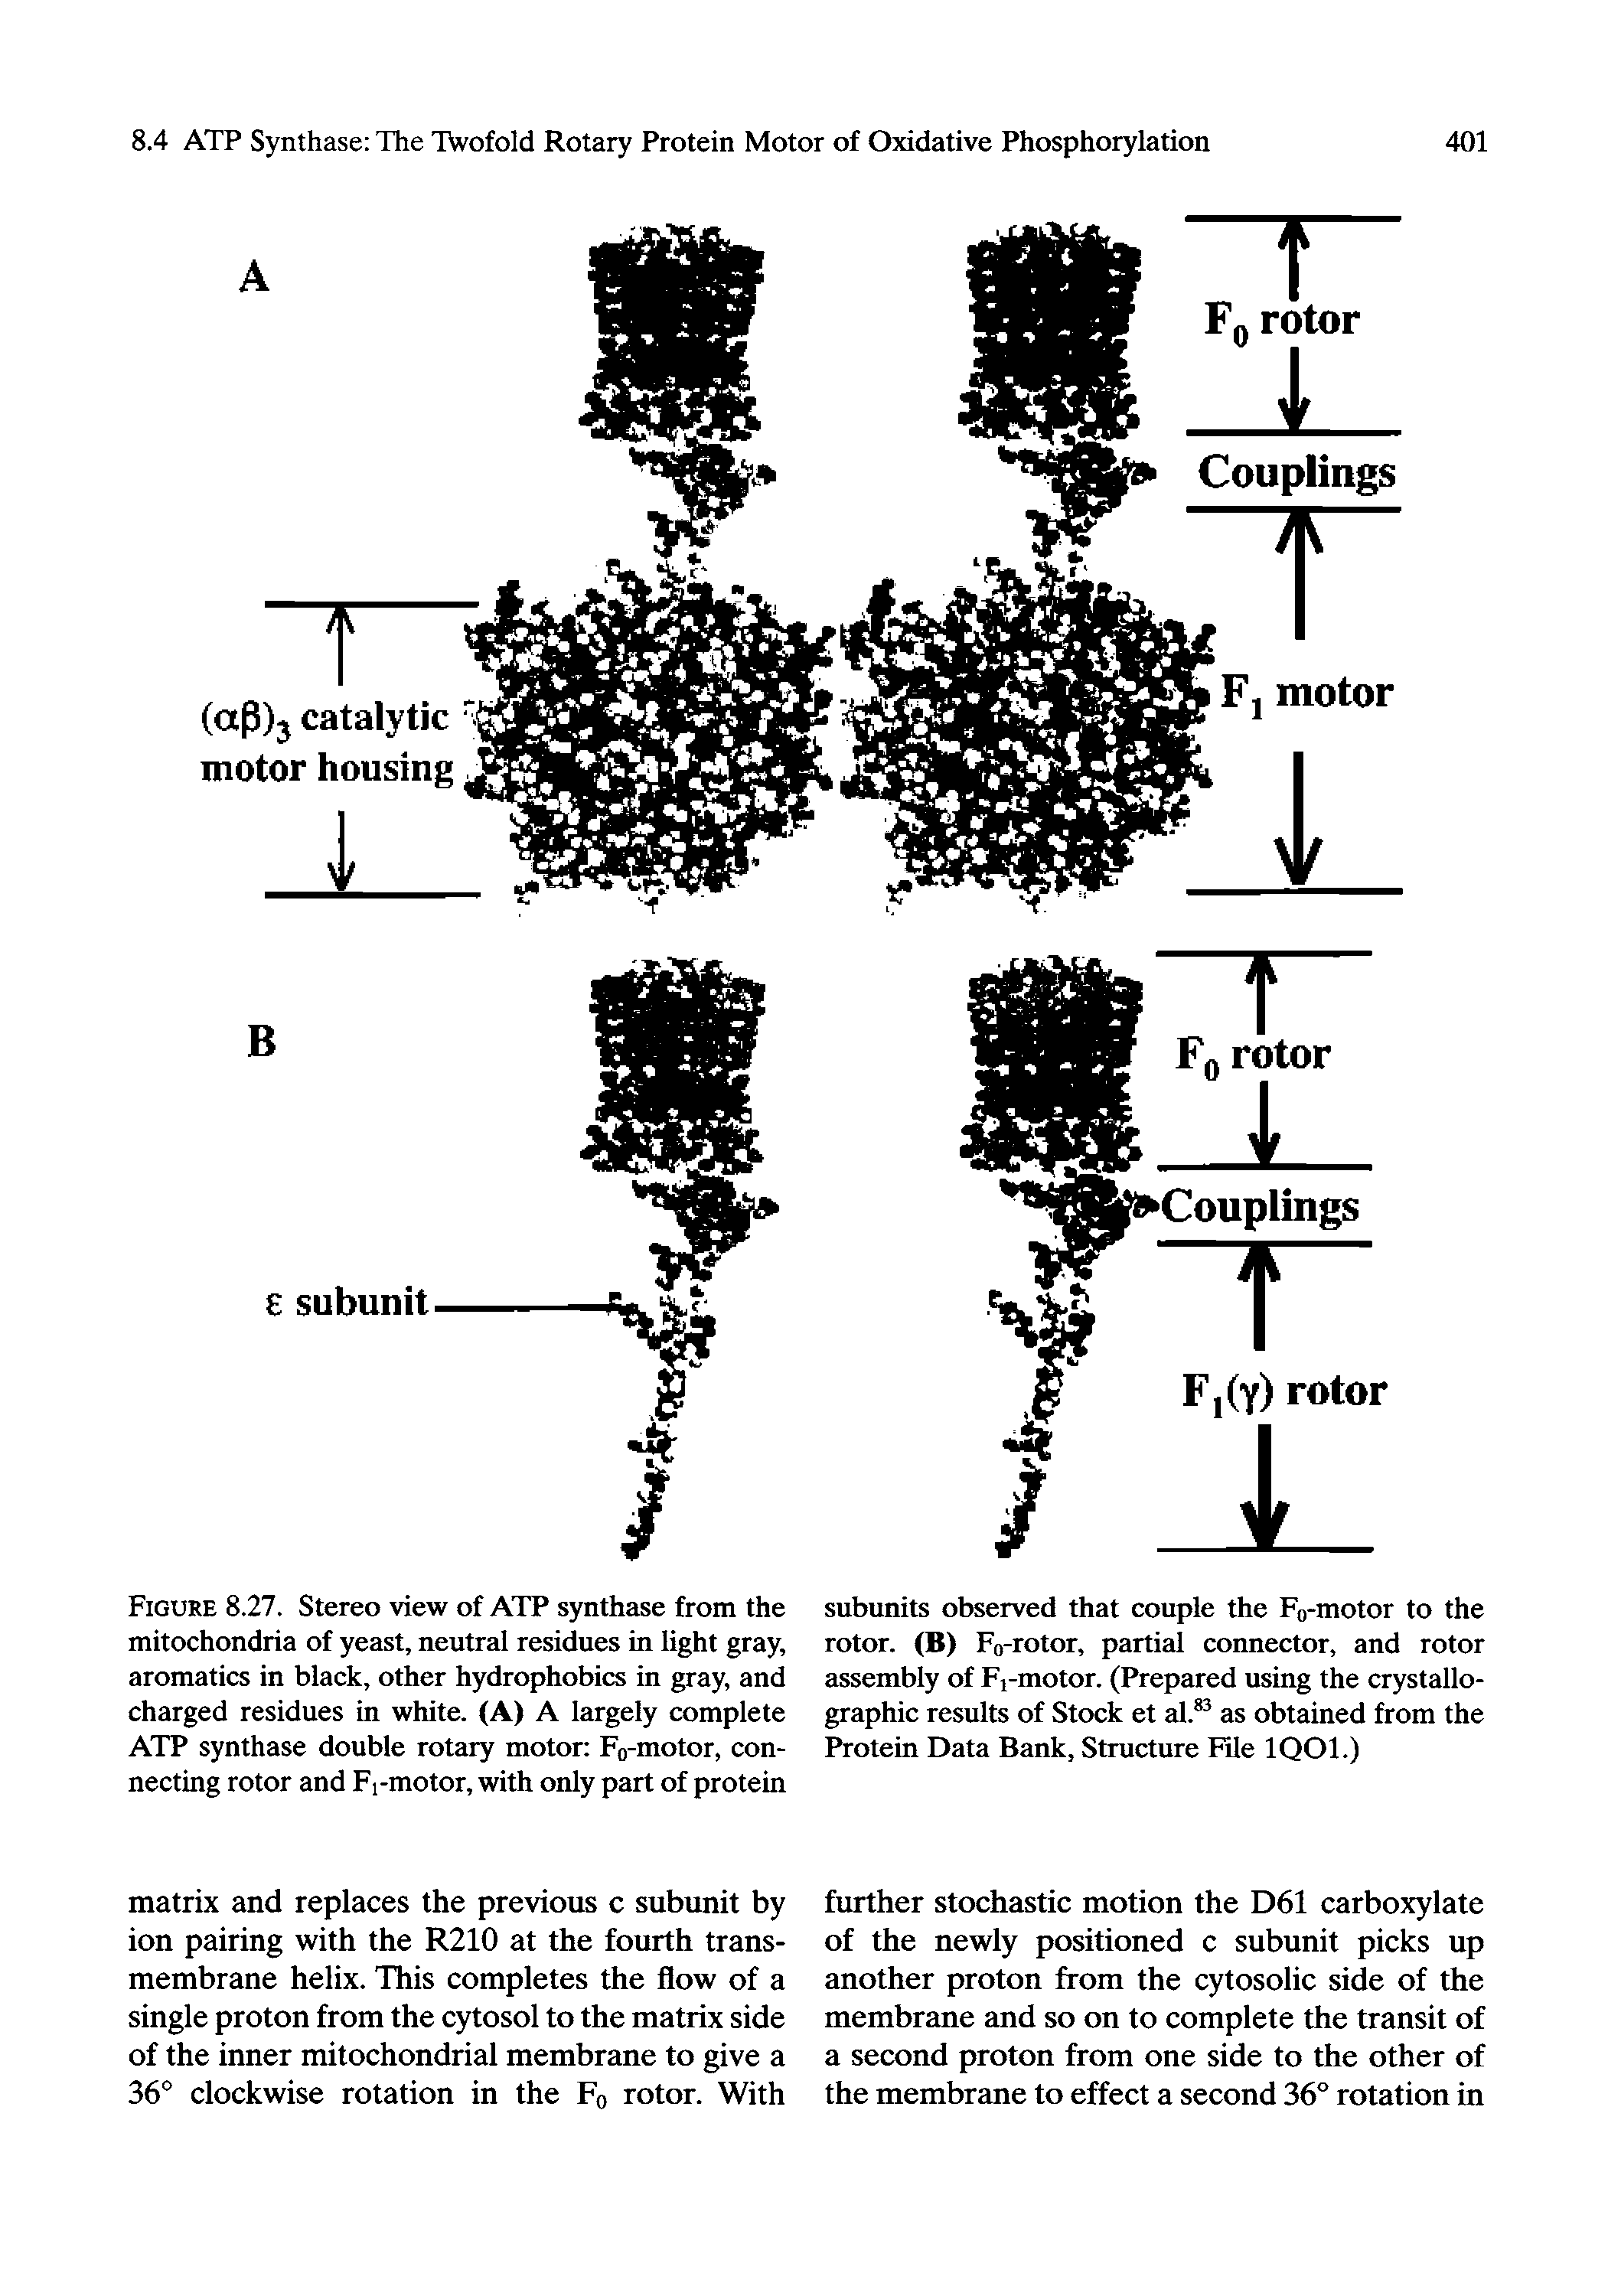 Figure 8.27. Stereo view of ATP synthase from the mitochondria of yeast, neutral residues in light gray, aromatics in black, other hydrophobics in gray, and charged residues in white. (A) A largely complete ATP synthase double rotary motor Fo-motor, connecting rotor and Fi-motor, with only part of protein...